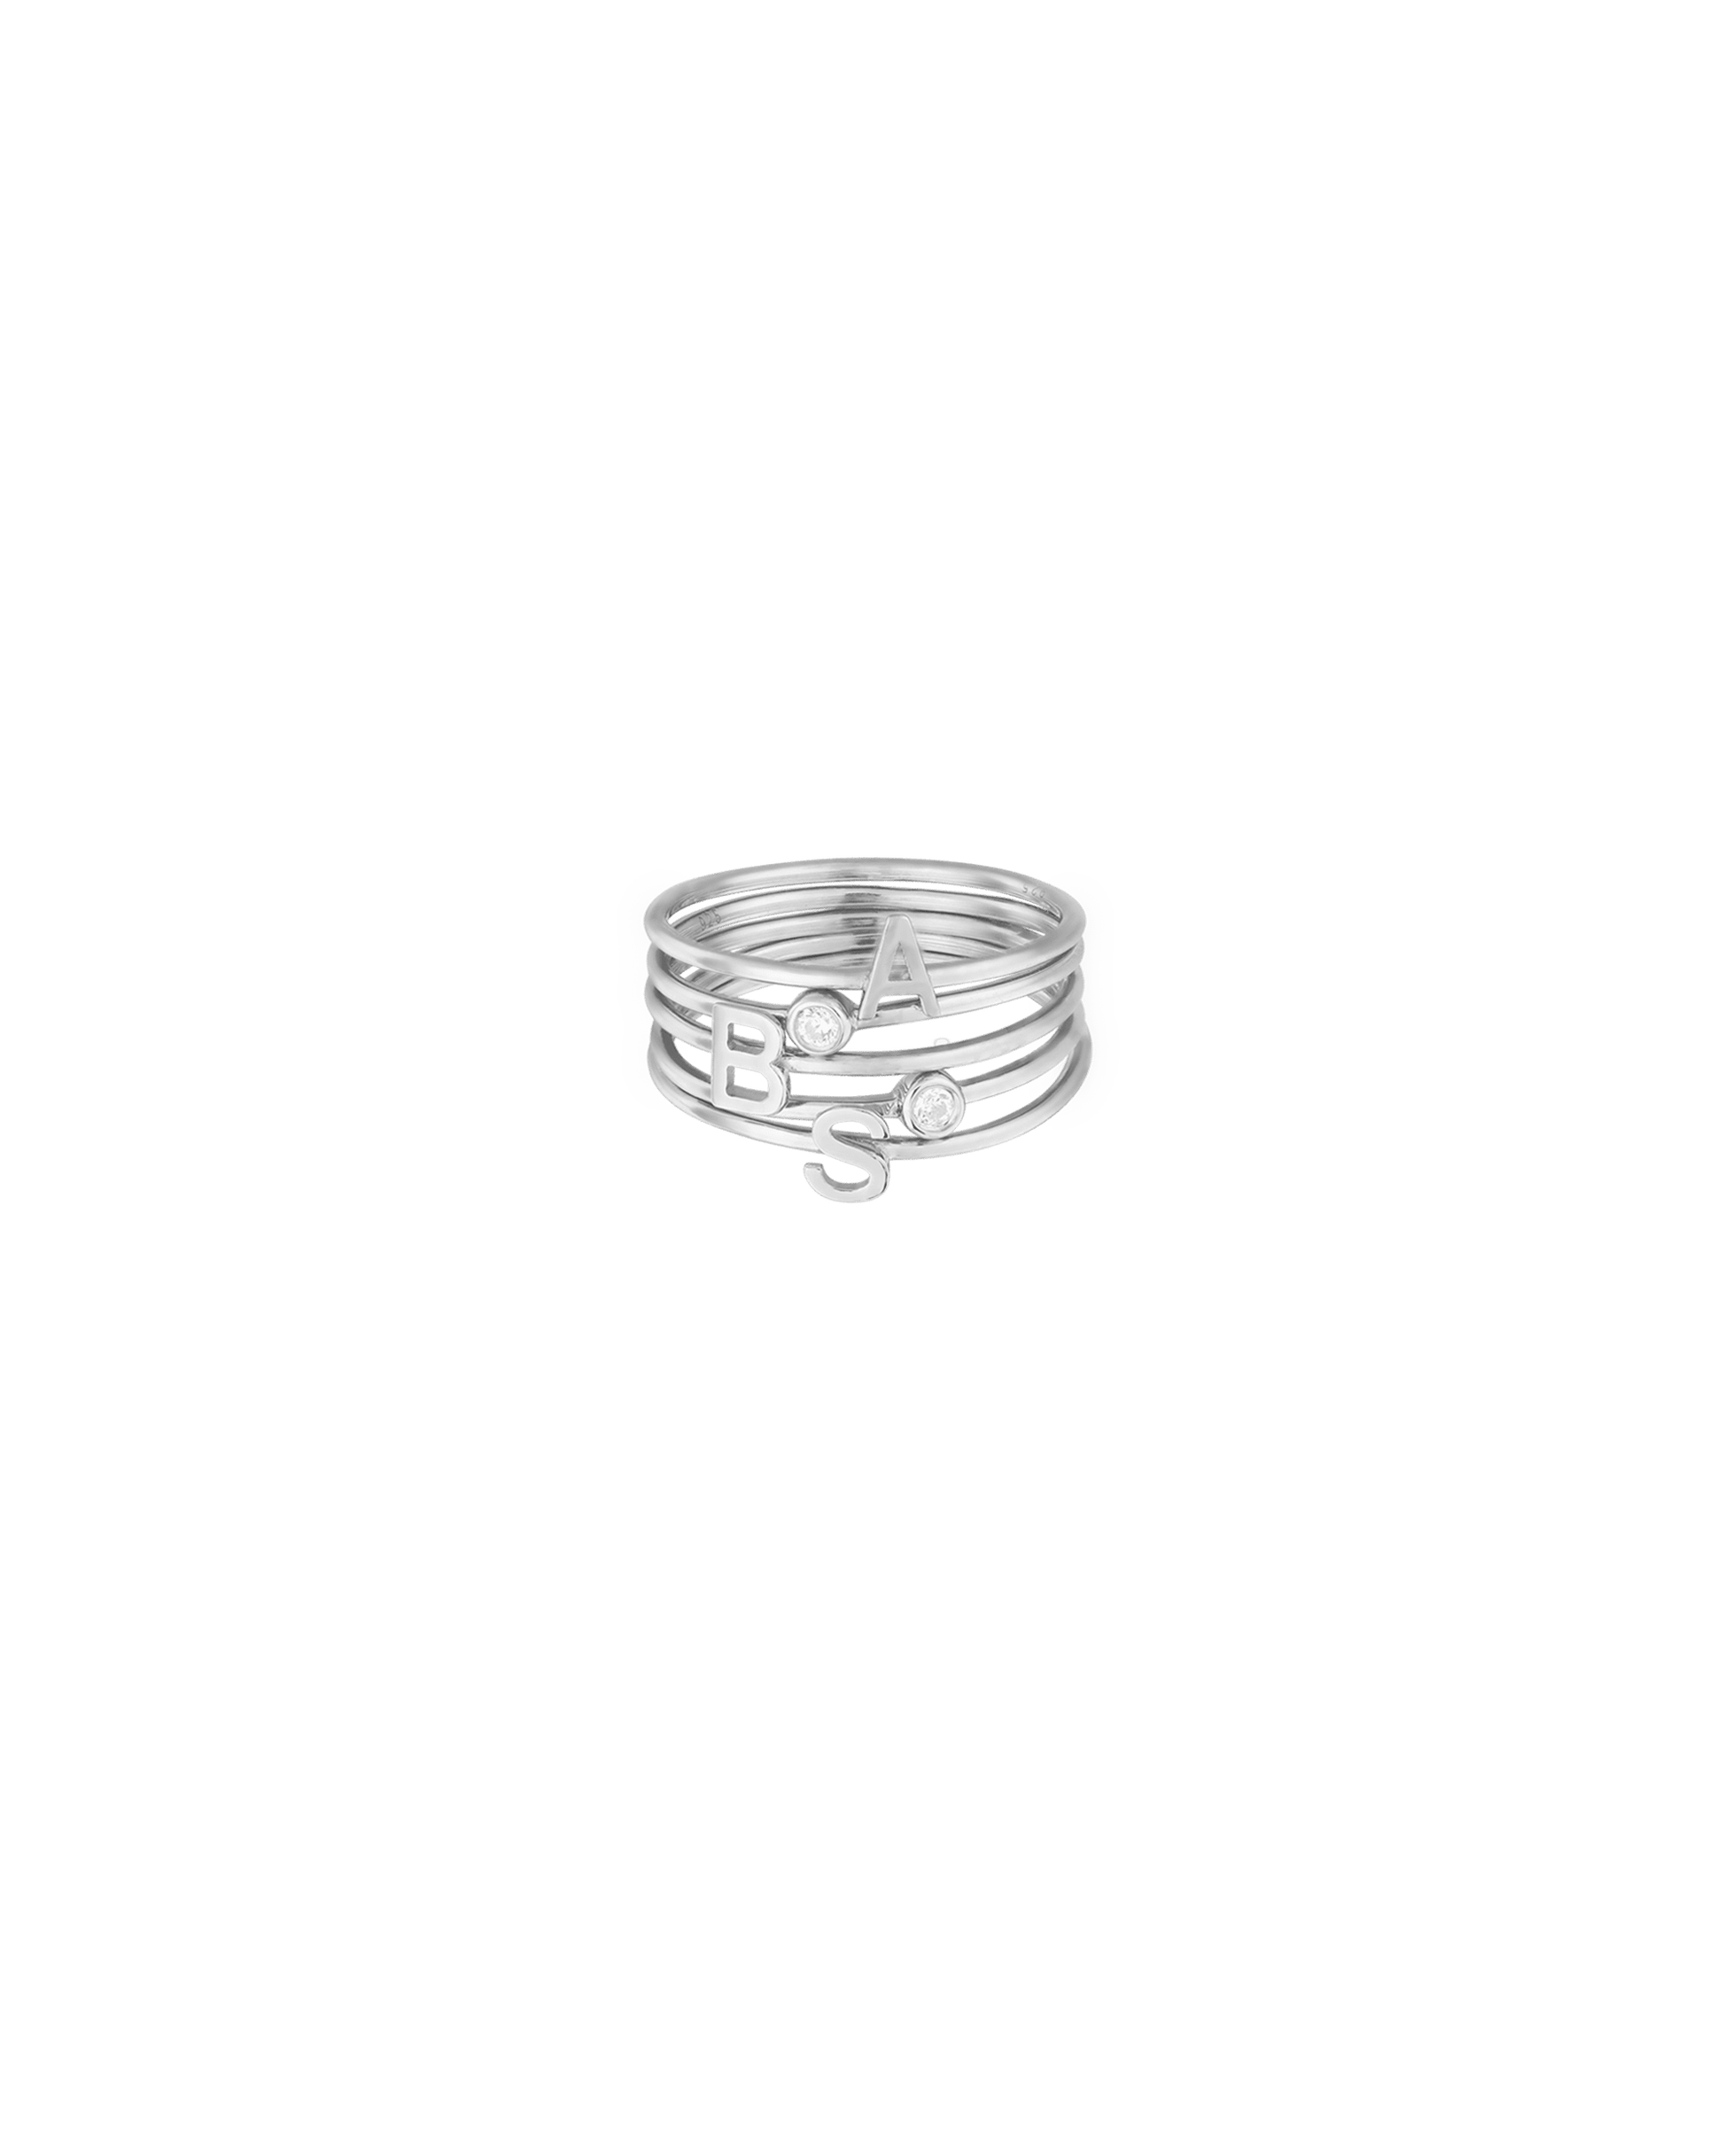 Stackable Initial Ring(s) - 14K White Gold Rings magal-dev 1 Ring US 4 